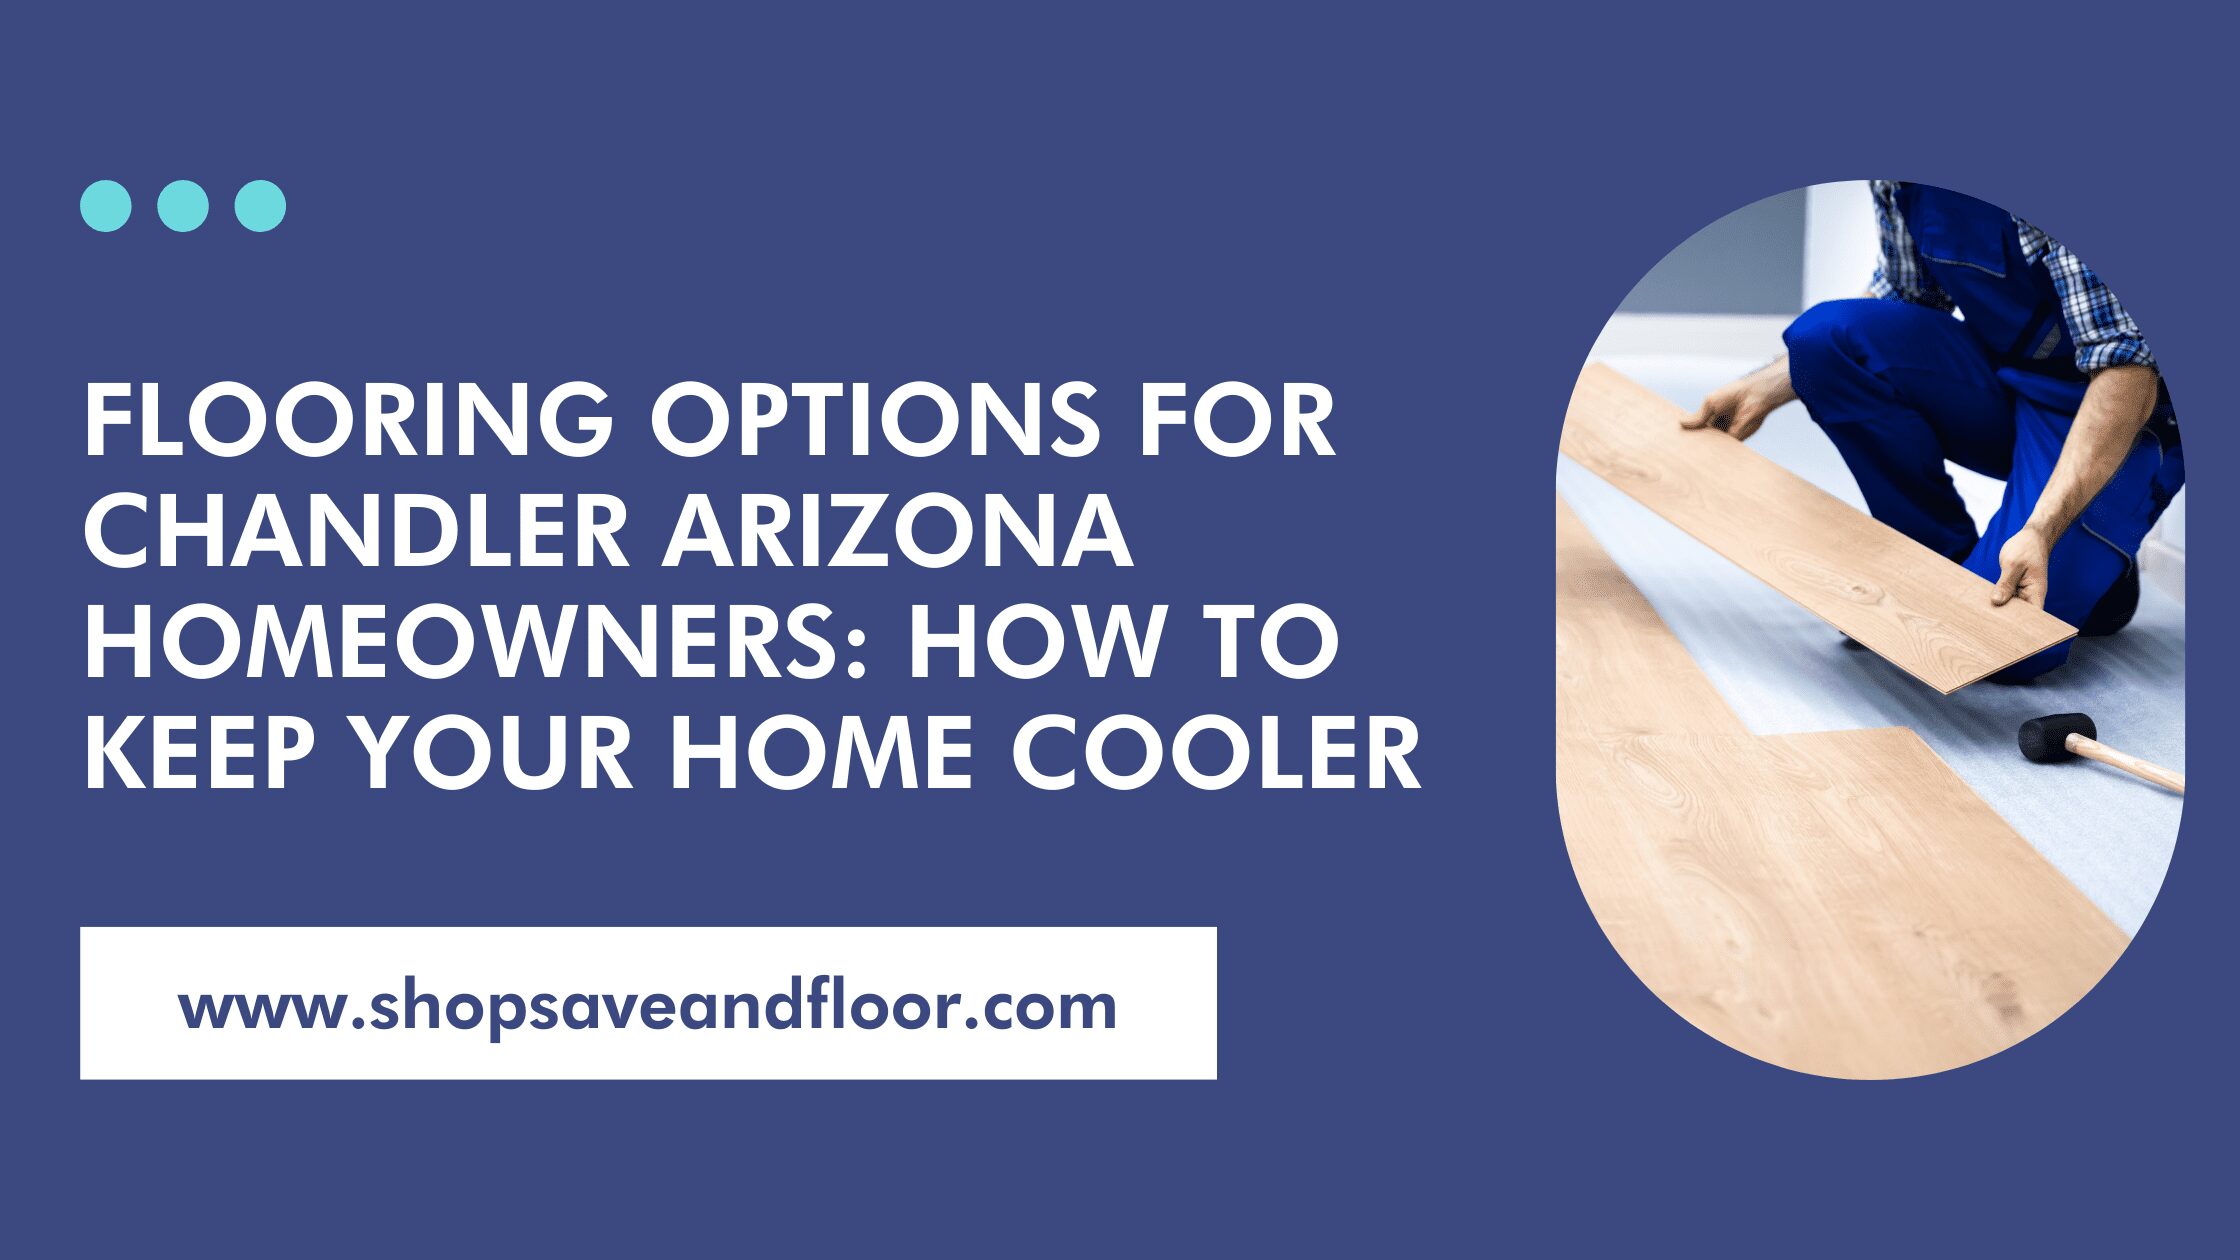 Flooring Options for Chandler Arizona Homeowners How to Keep Your Home Cooler